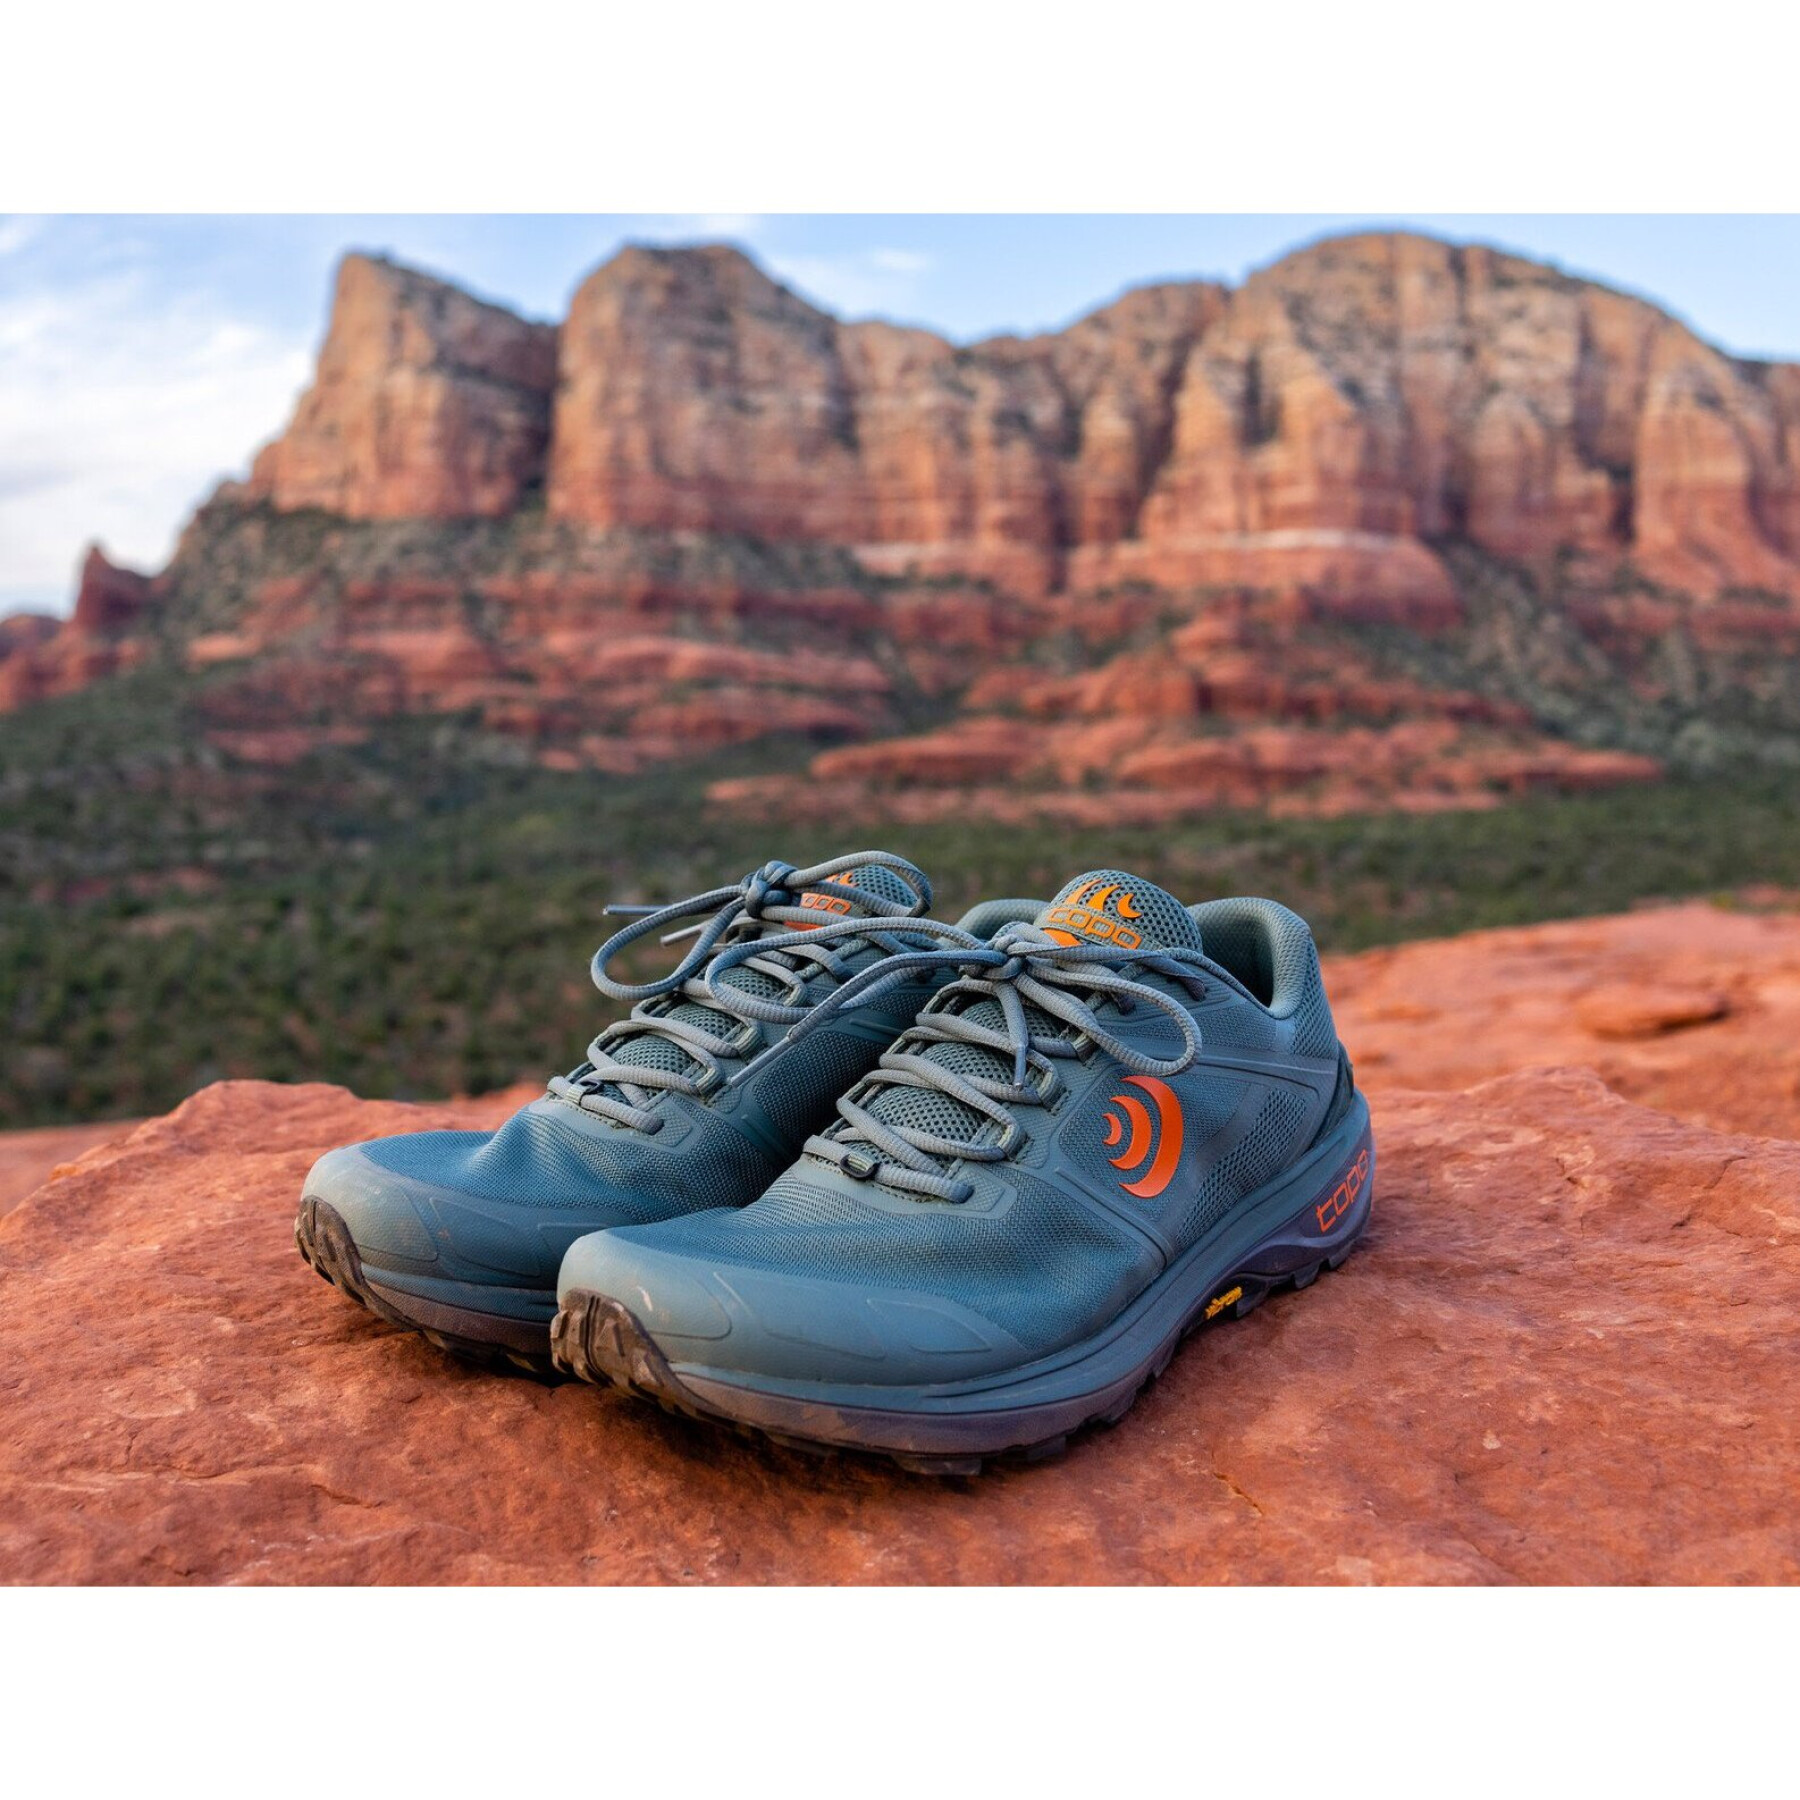 Trail running shoes Topo Athletic Terraventure 4